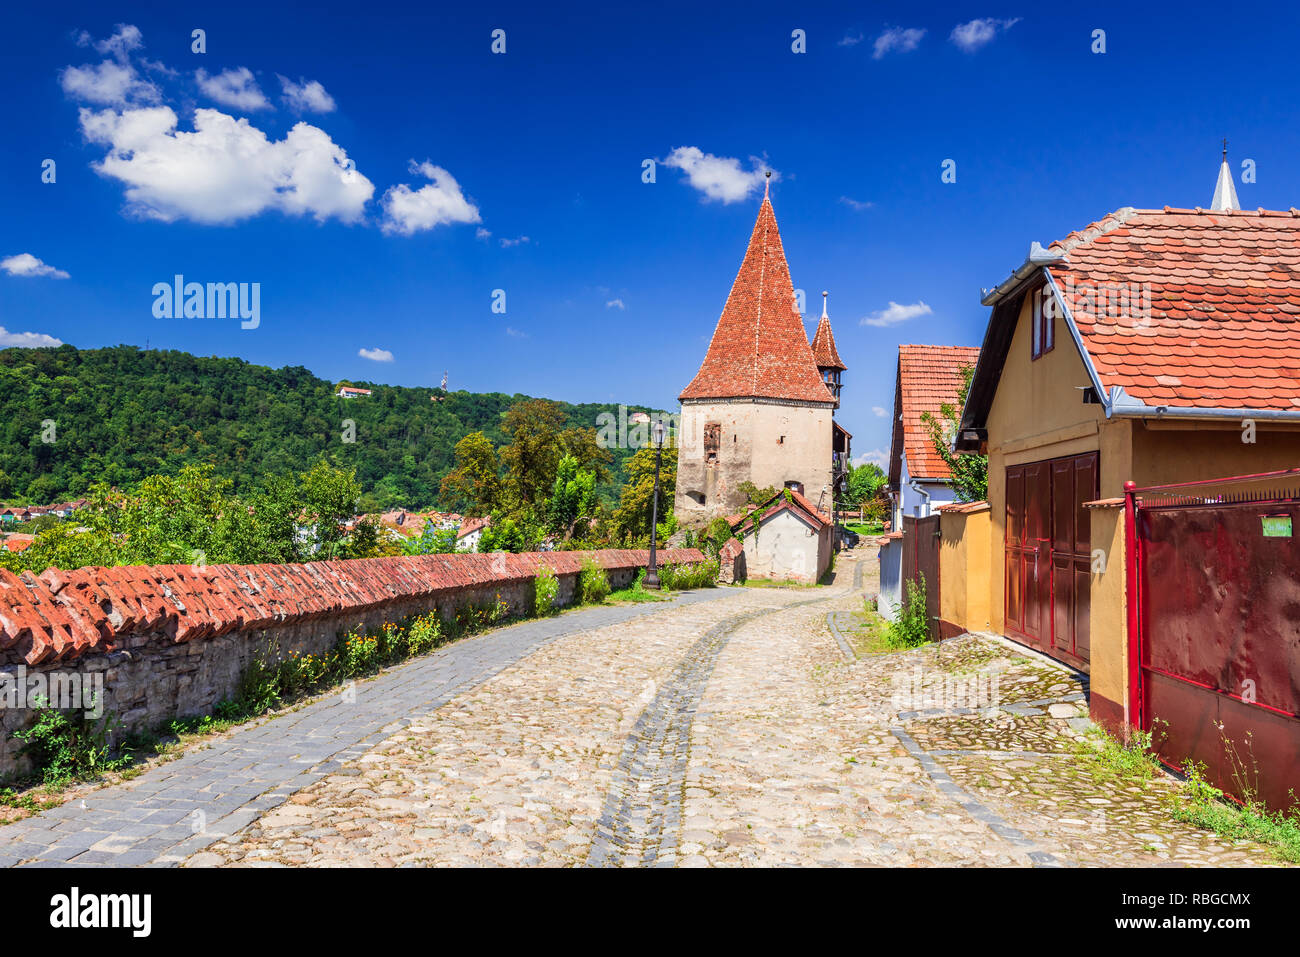 Sighisoara, Transylvania. Famous medieval fortified city built by Saxons in Romania. Stock Photo